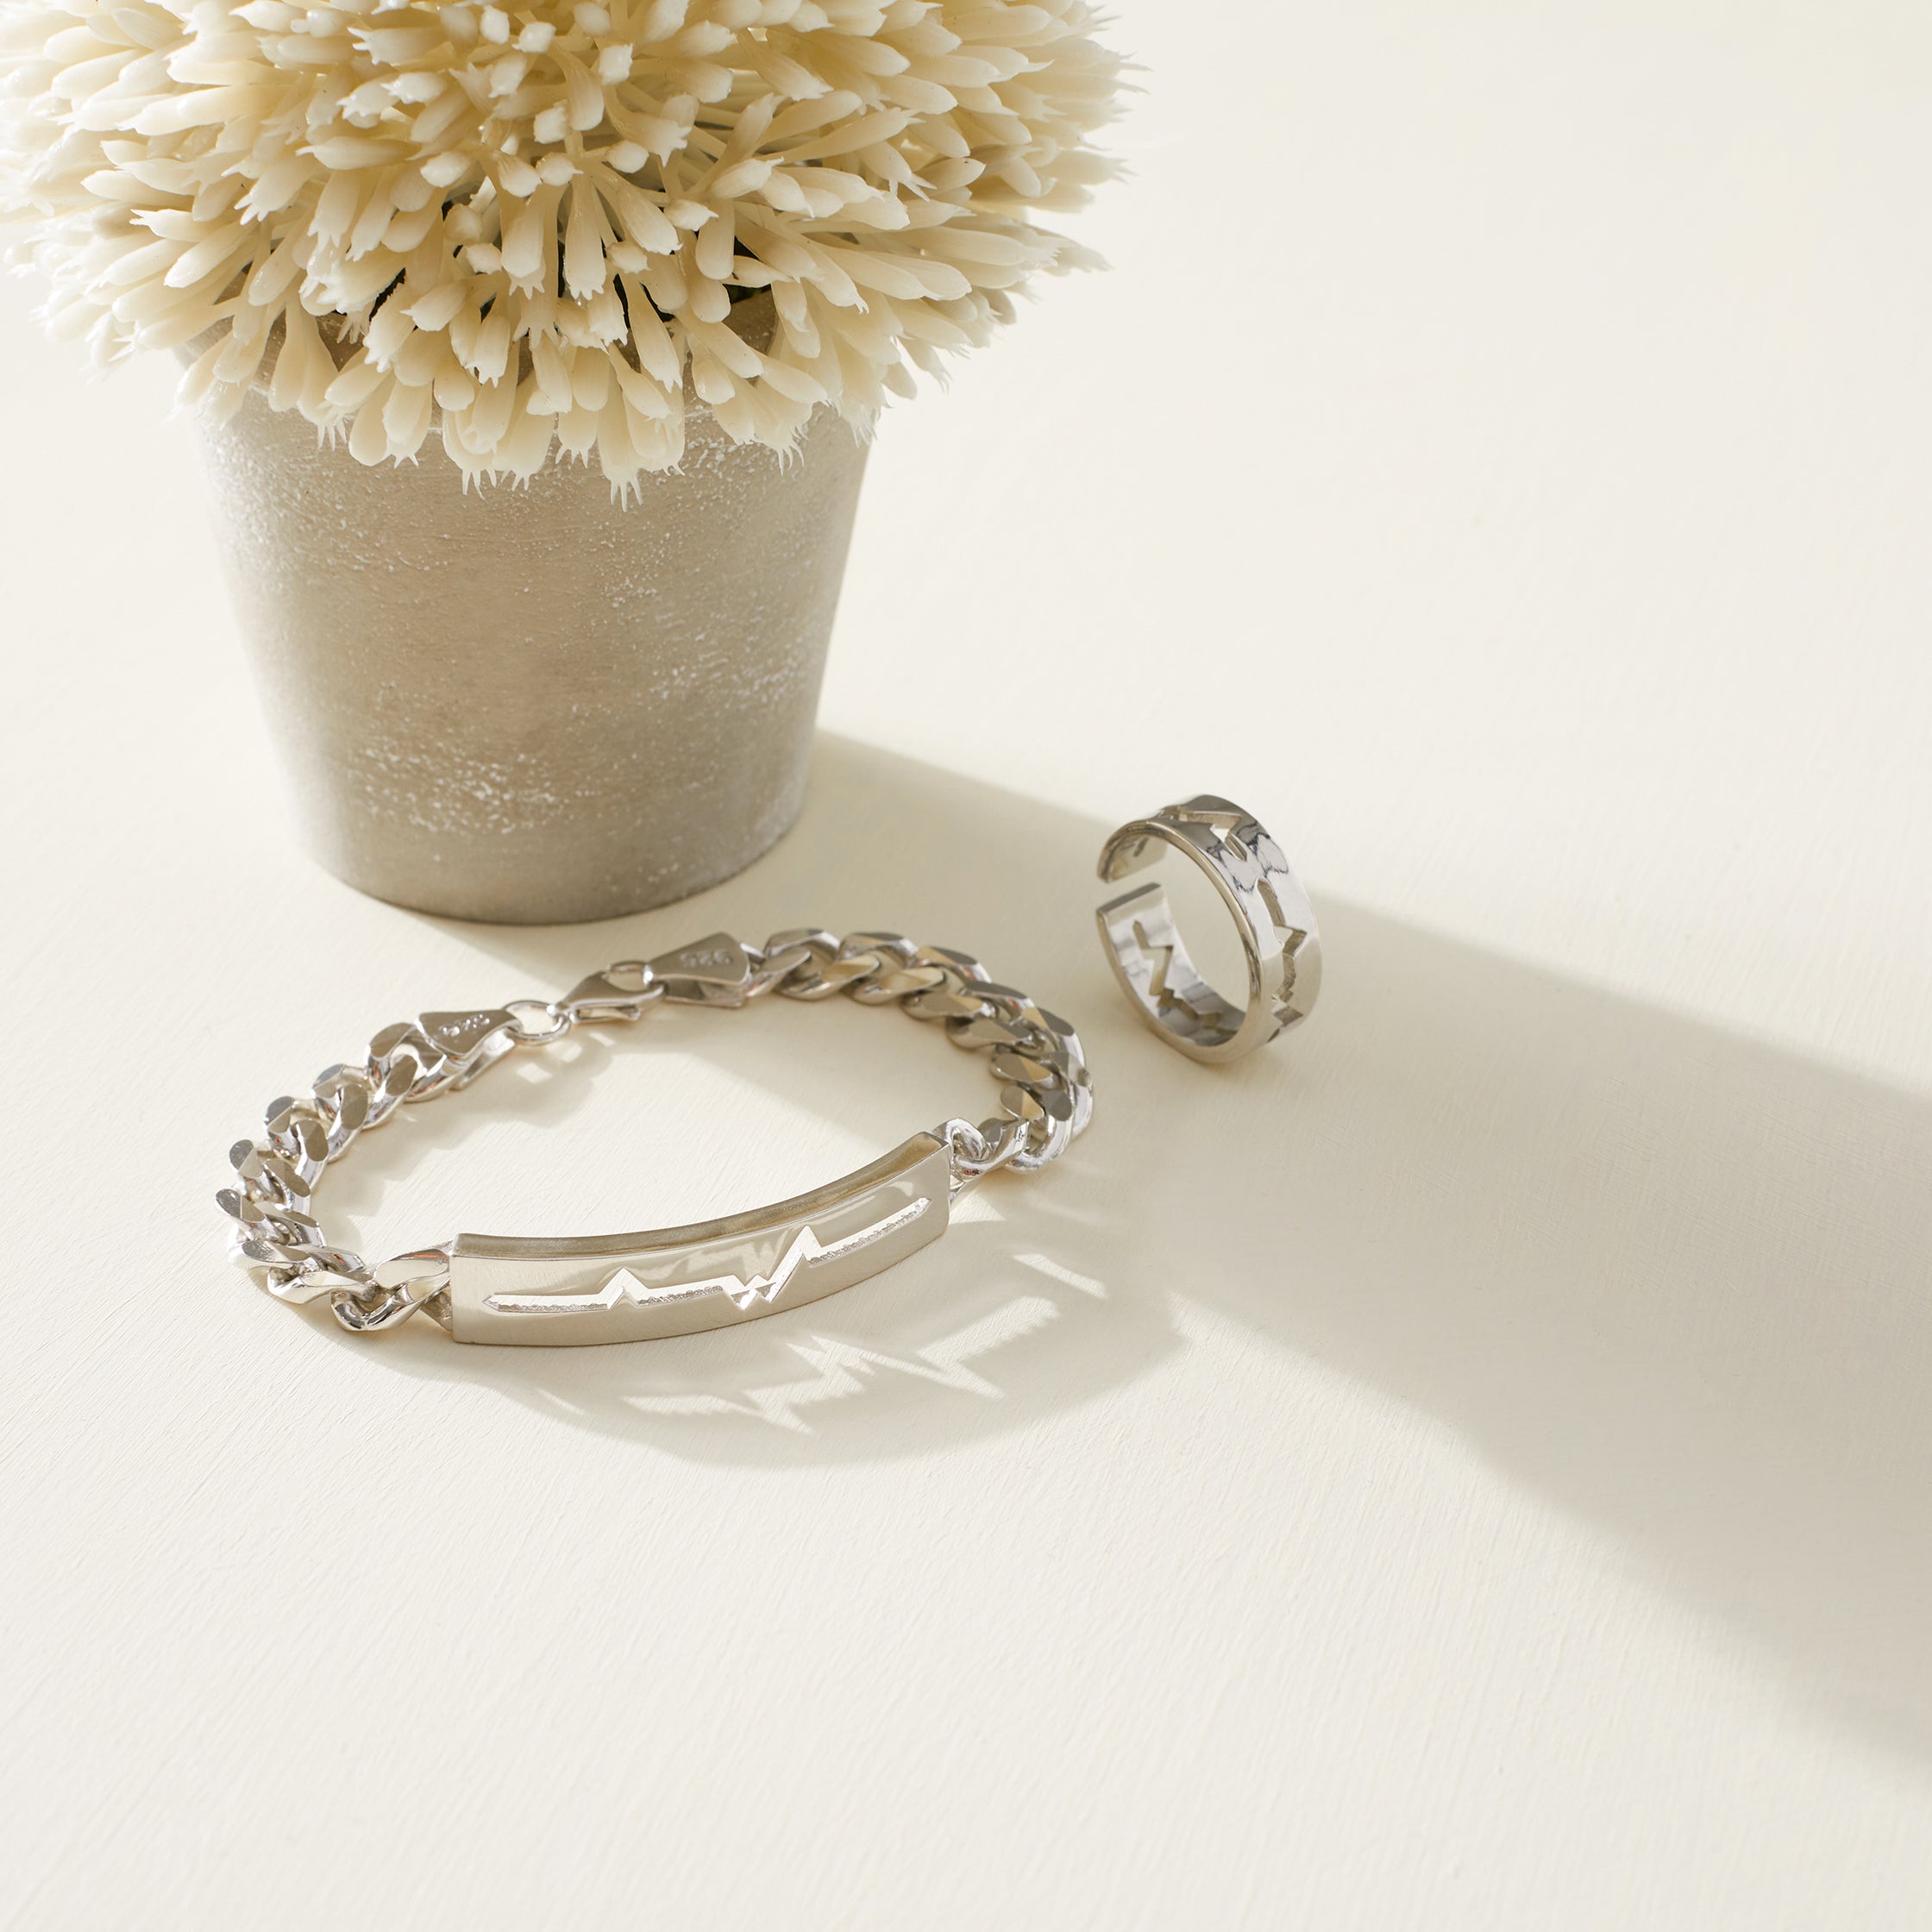 Pulse Ring in Silver